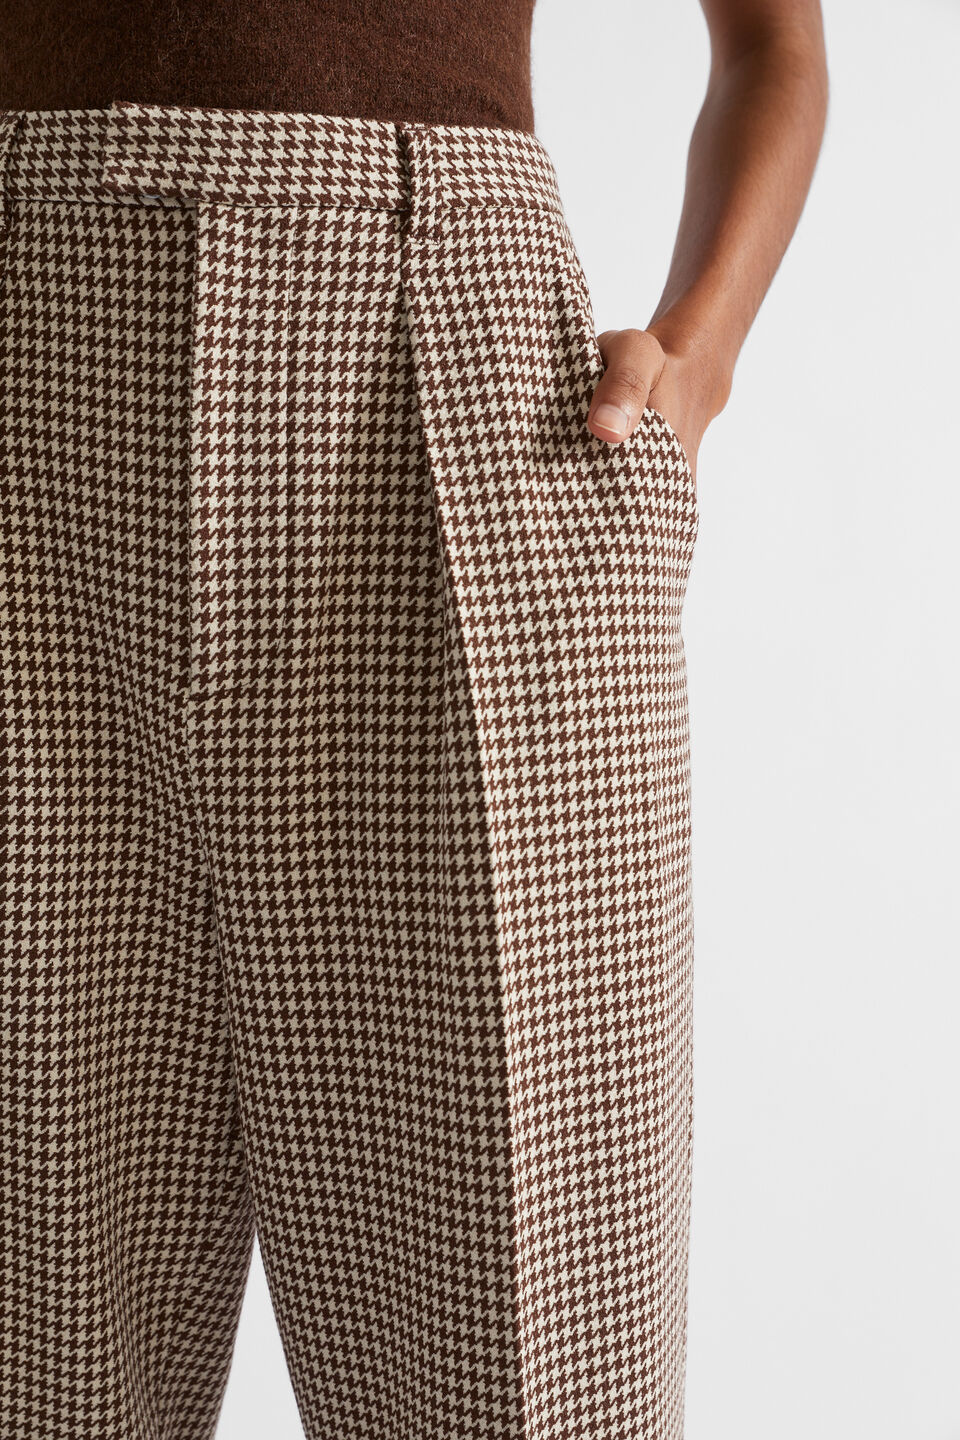 Houndstooth Pleat Front Pant  Hot Chocolate Houndstooth